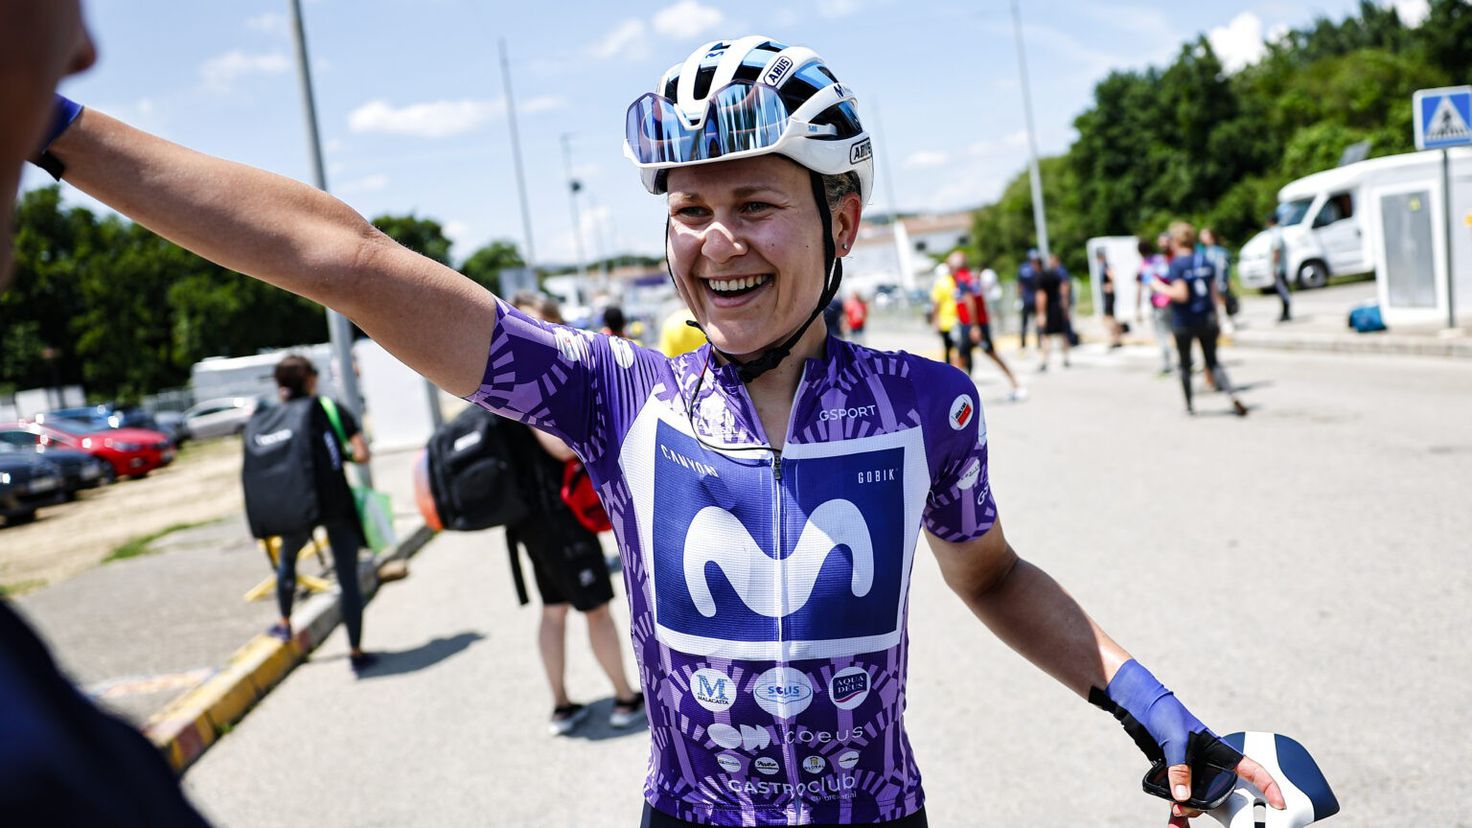 Katrine Aalerud takes the Vuelta a Andalucía in the last stage
